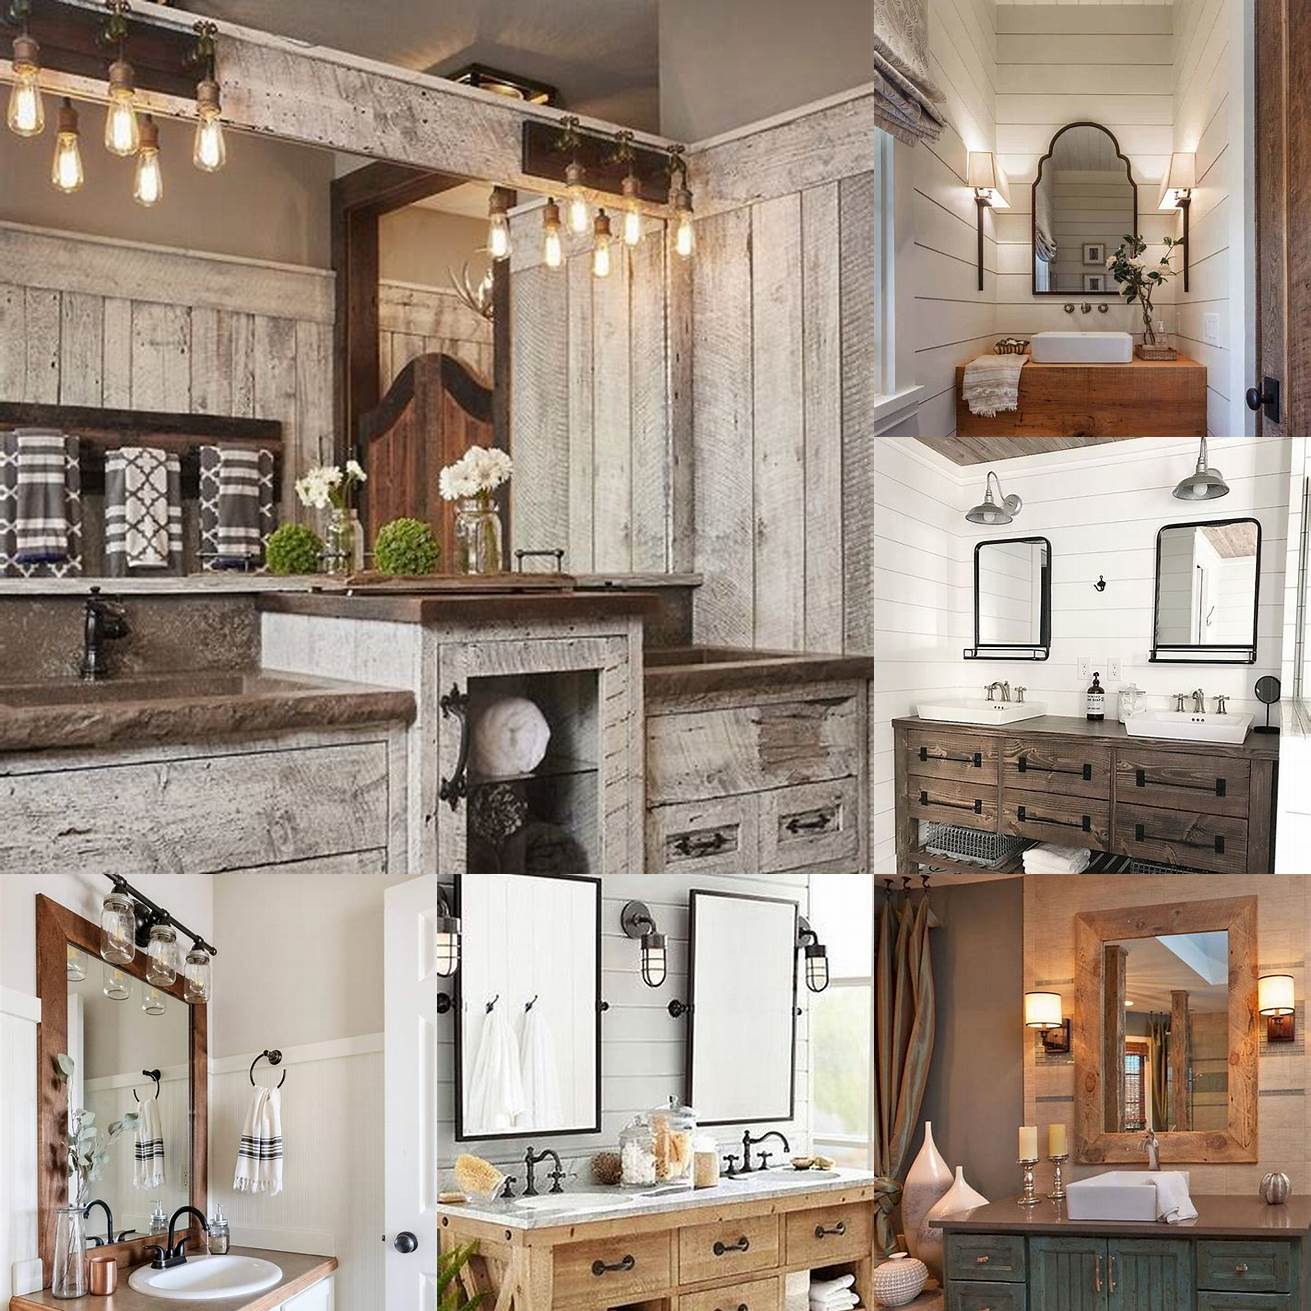 A farmhouse guest bathroom vanity with a vintage look and a mix of modern and rustic elements